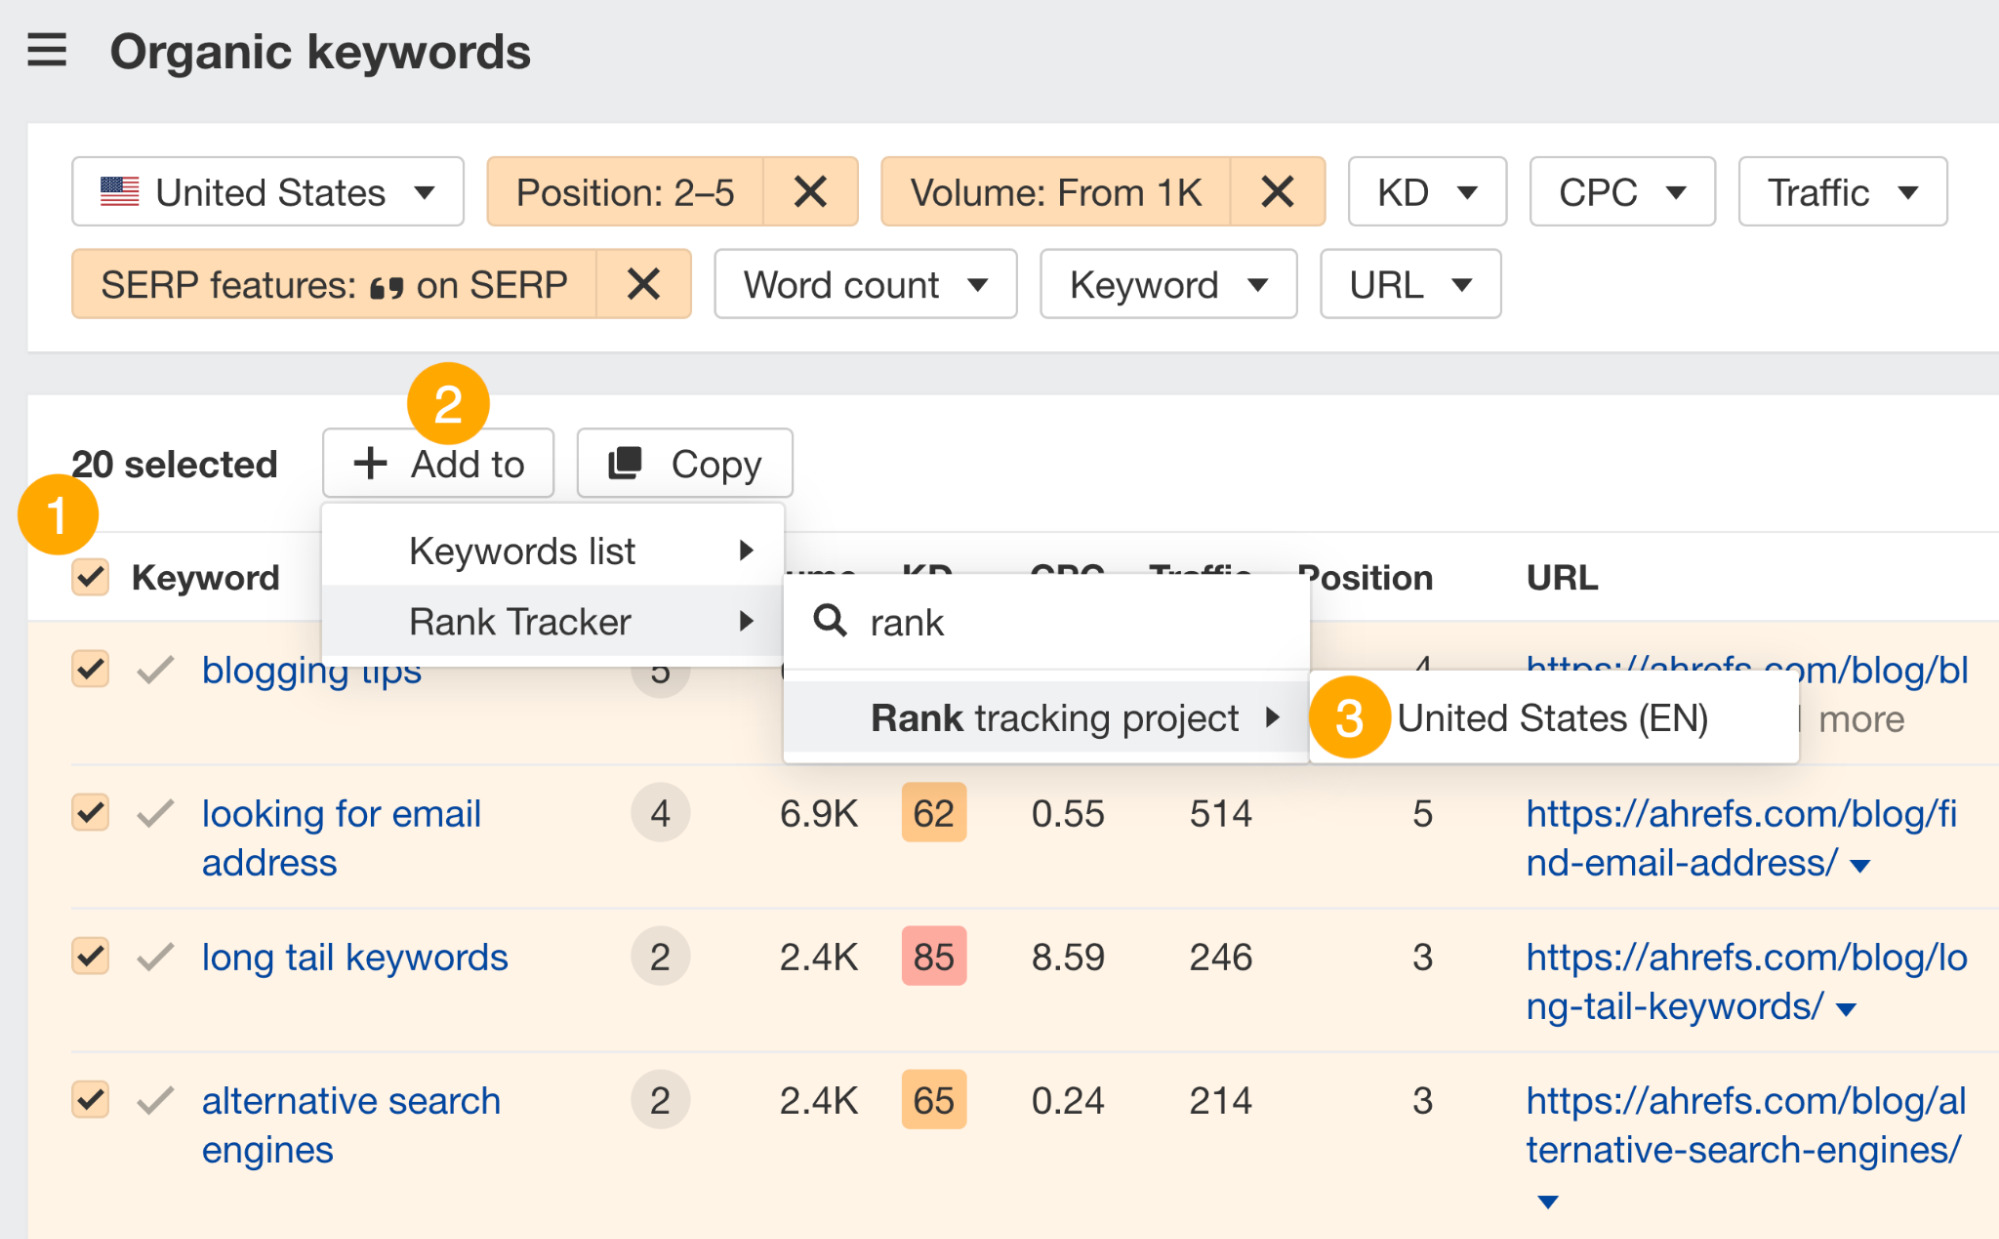 Adding keywords triggering featured snippets to Ahrefs' Rank Tracker